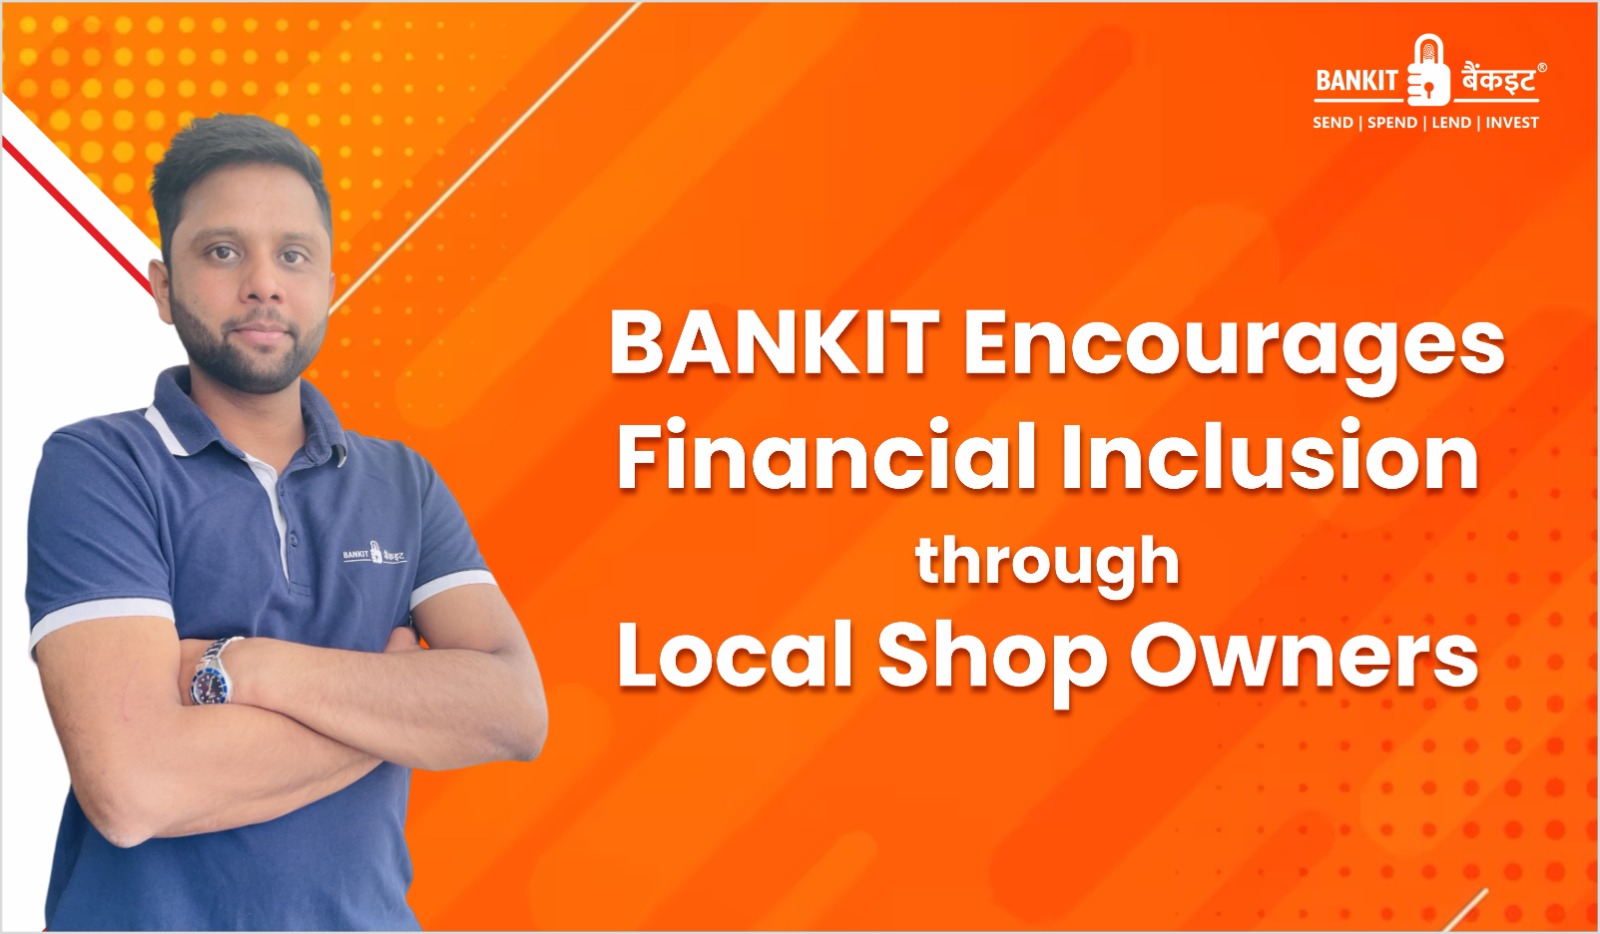 BANKIT Encourages Financial Inclusion through Local Shop Owners 